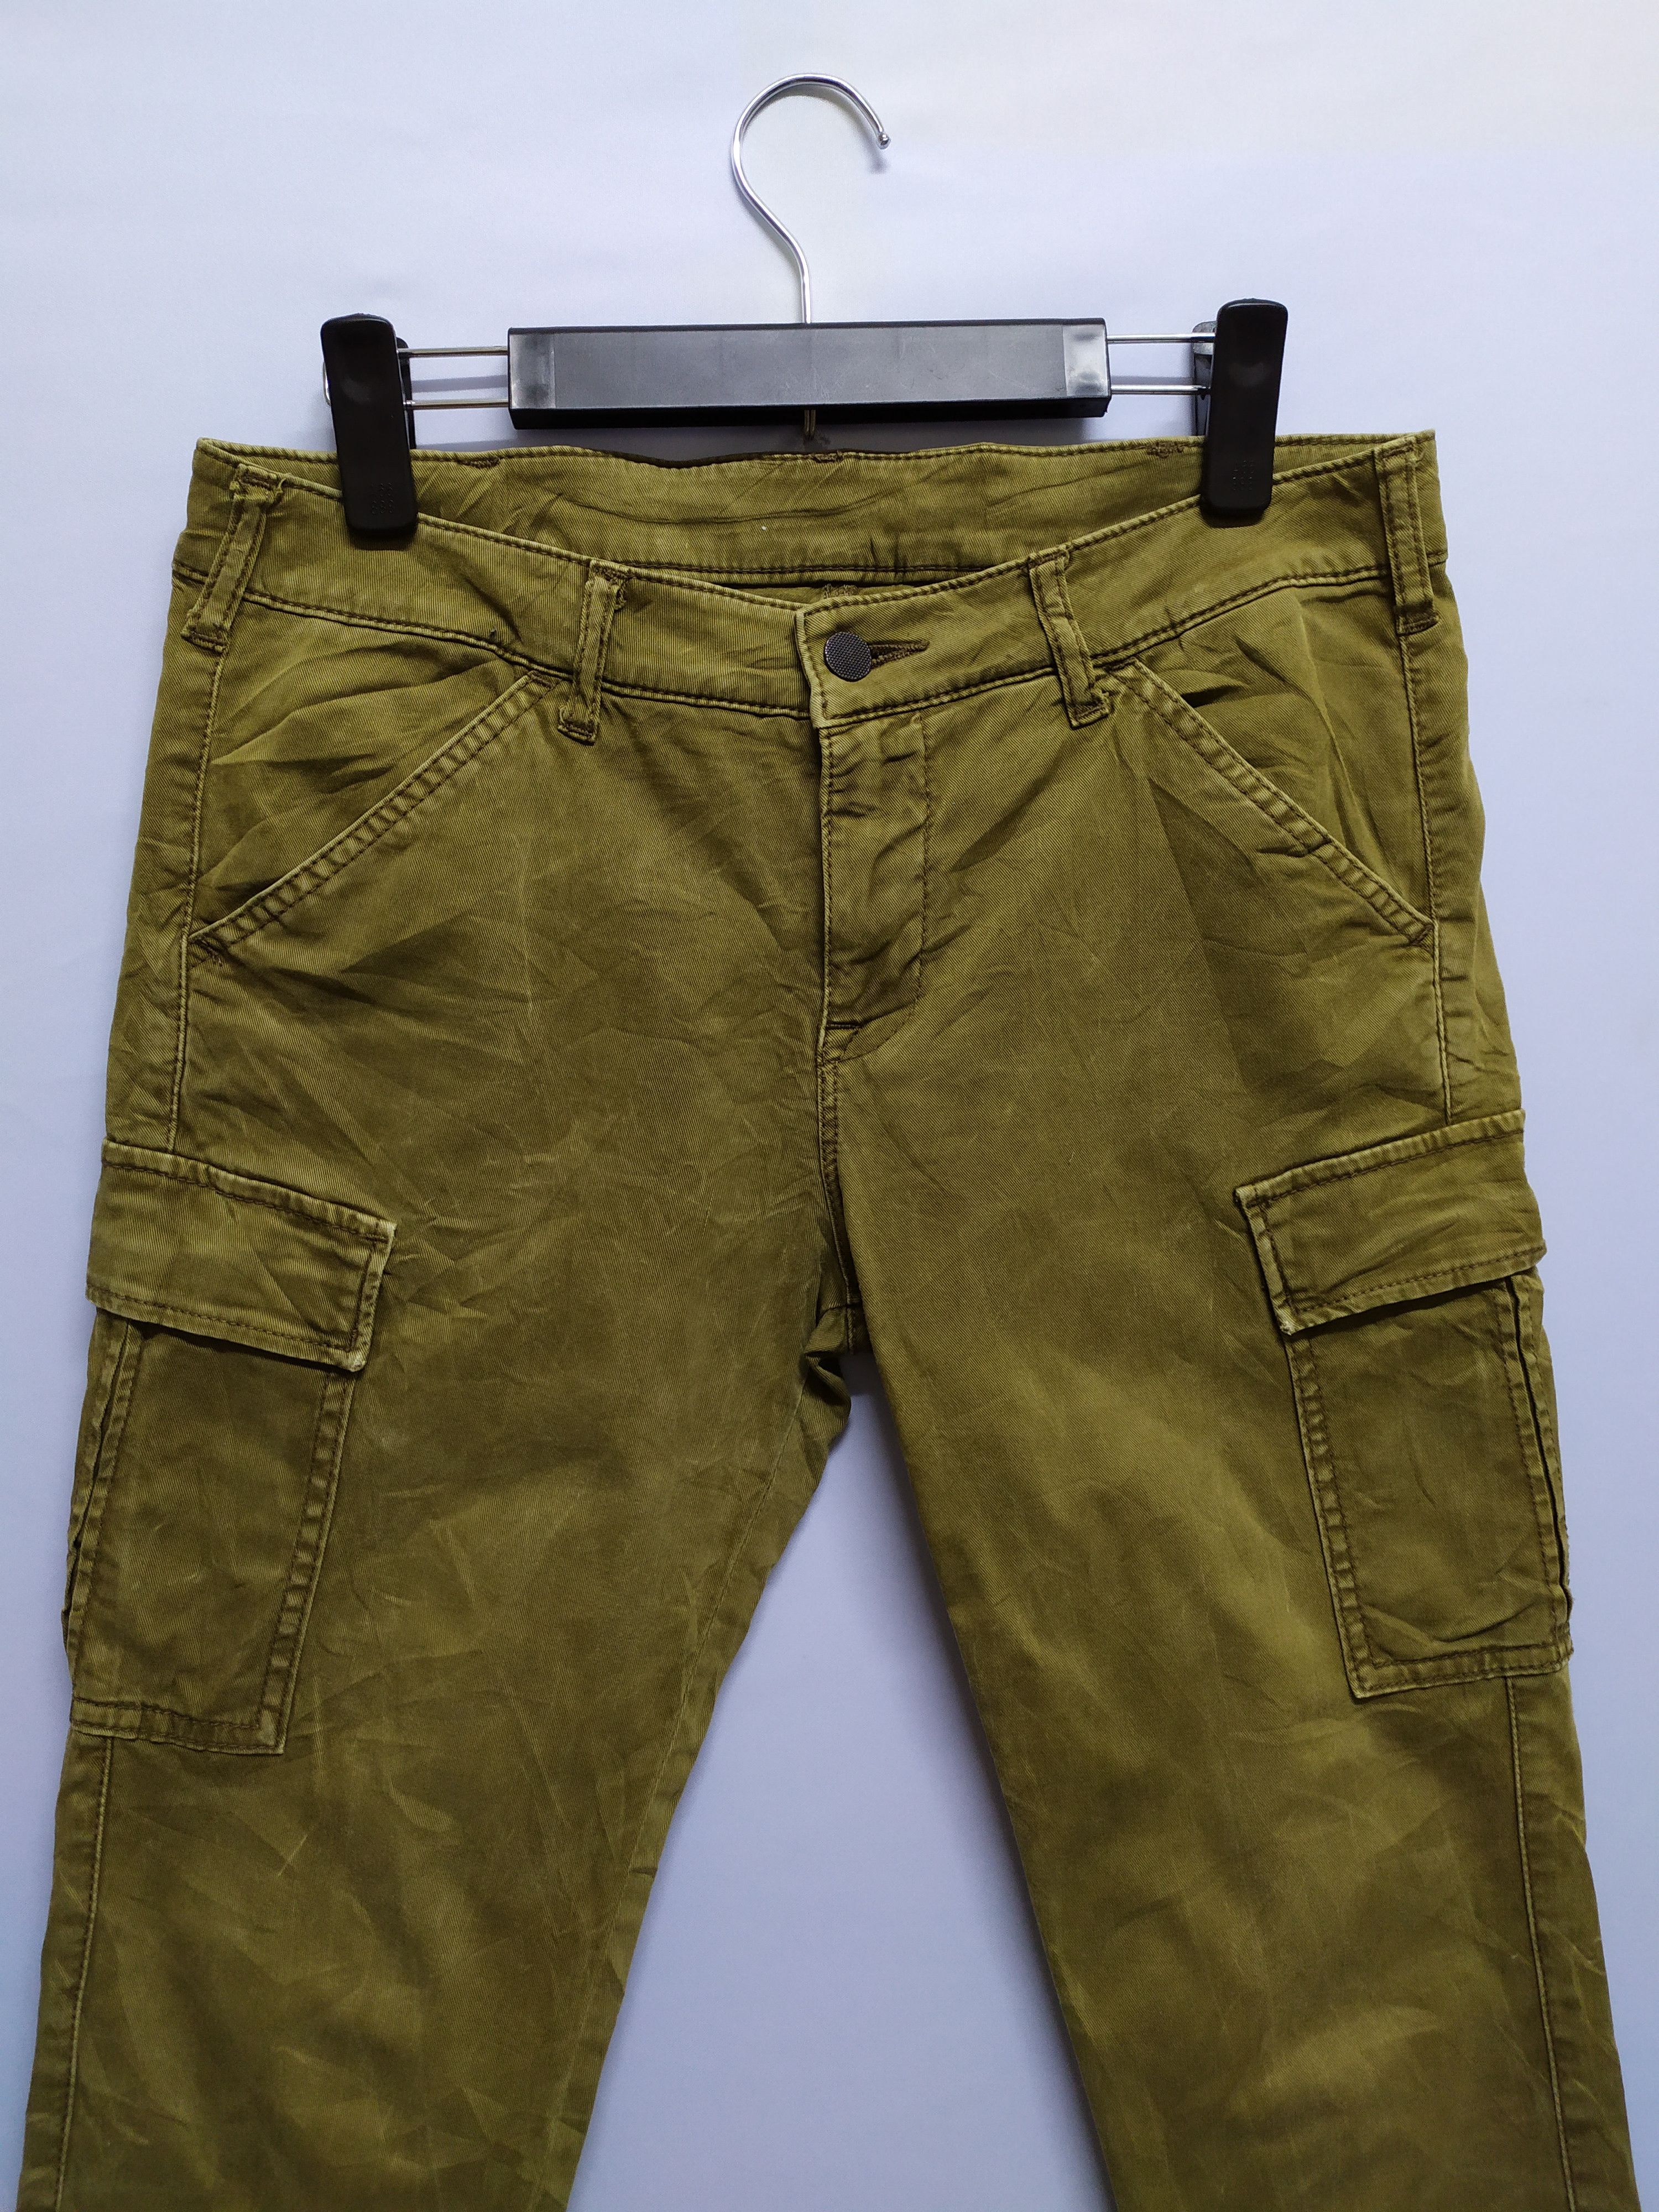 Uniqlo Uniqlo Streetwear Cargo Pants Multipocket tactical Size US 29 - 9 Preview